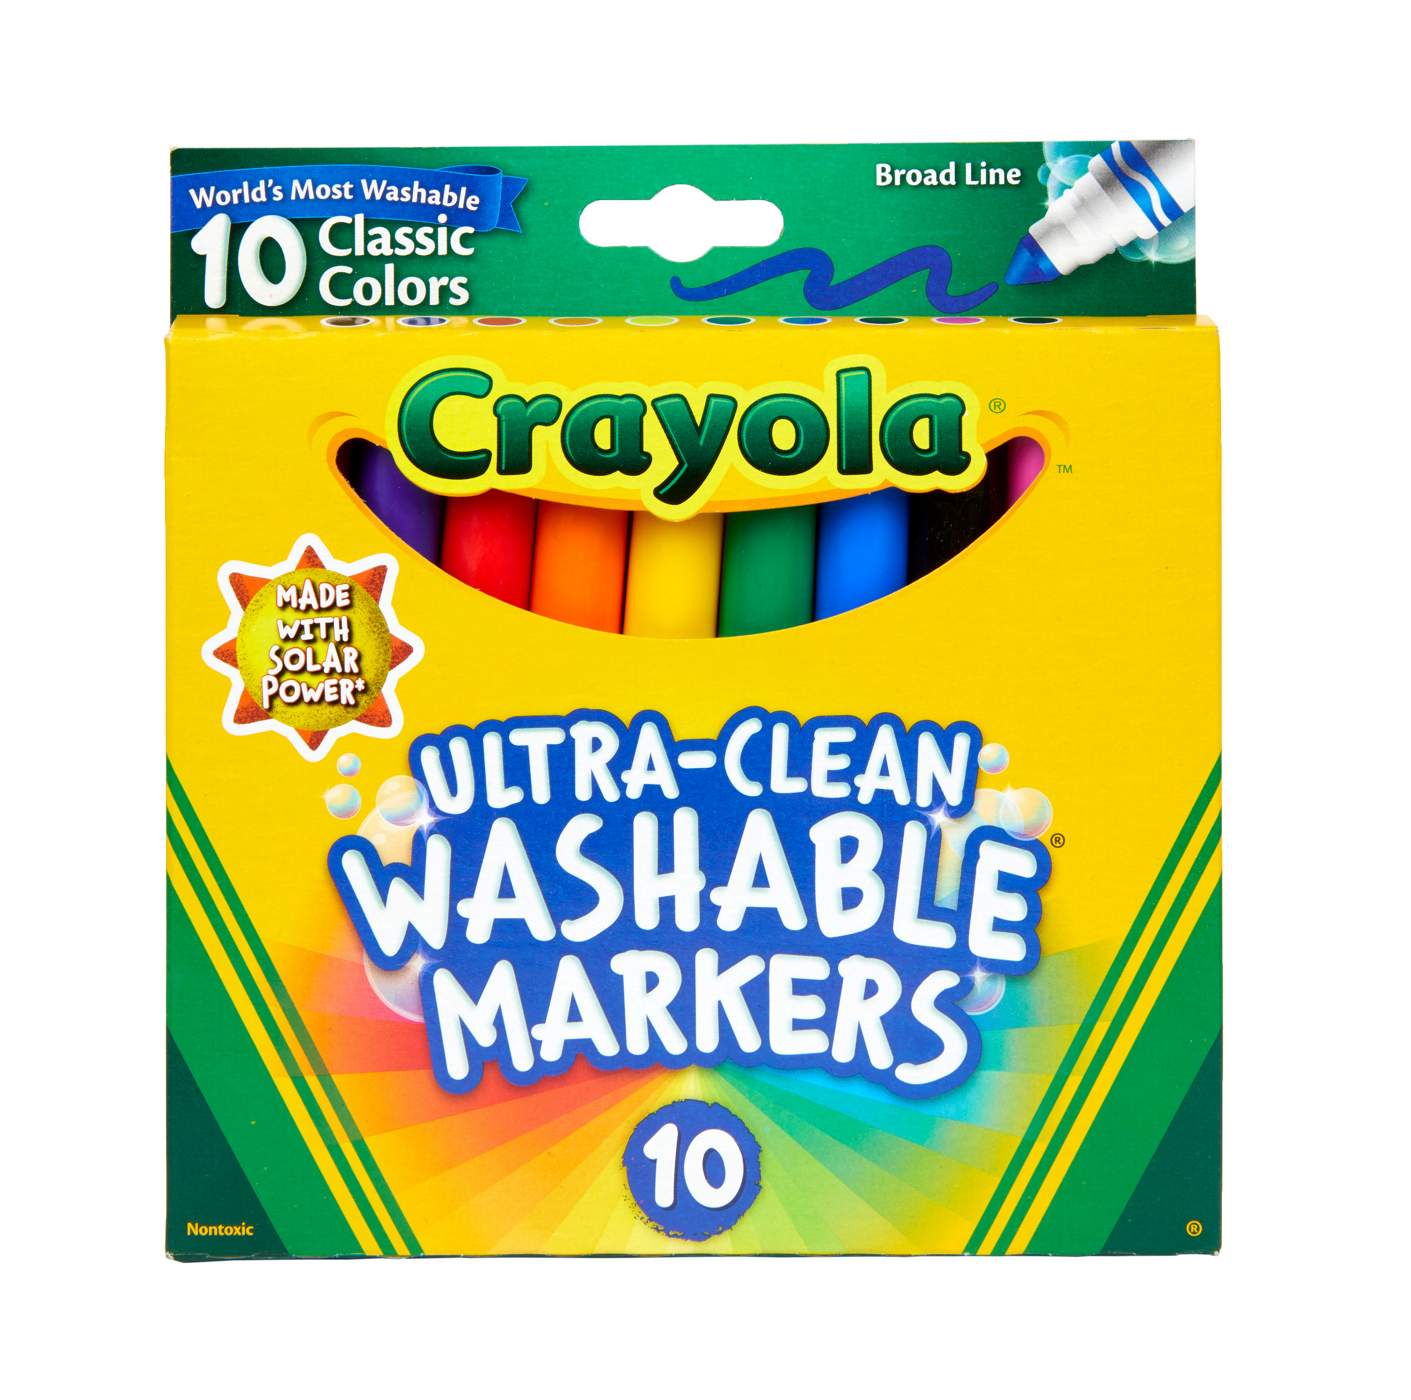 Crayola Broad Line Ultra-Clean Washable Markers; image 1 of 2